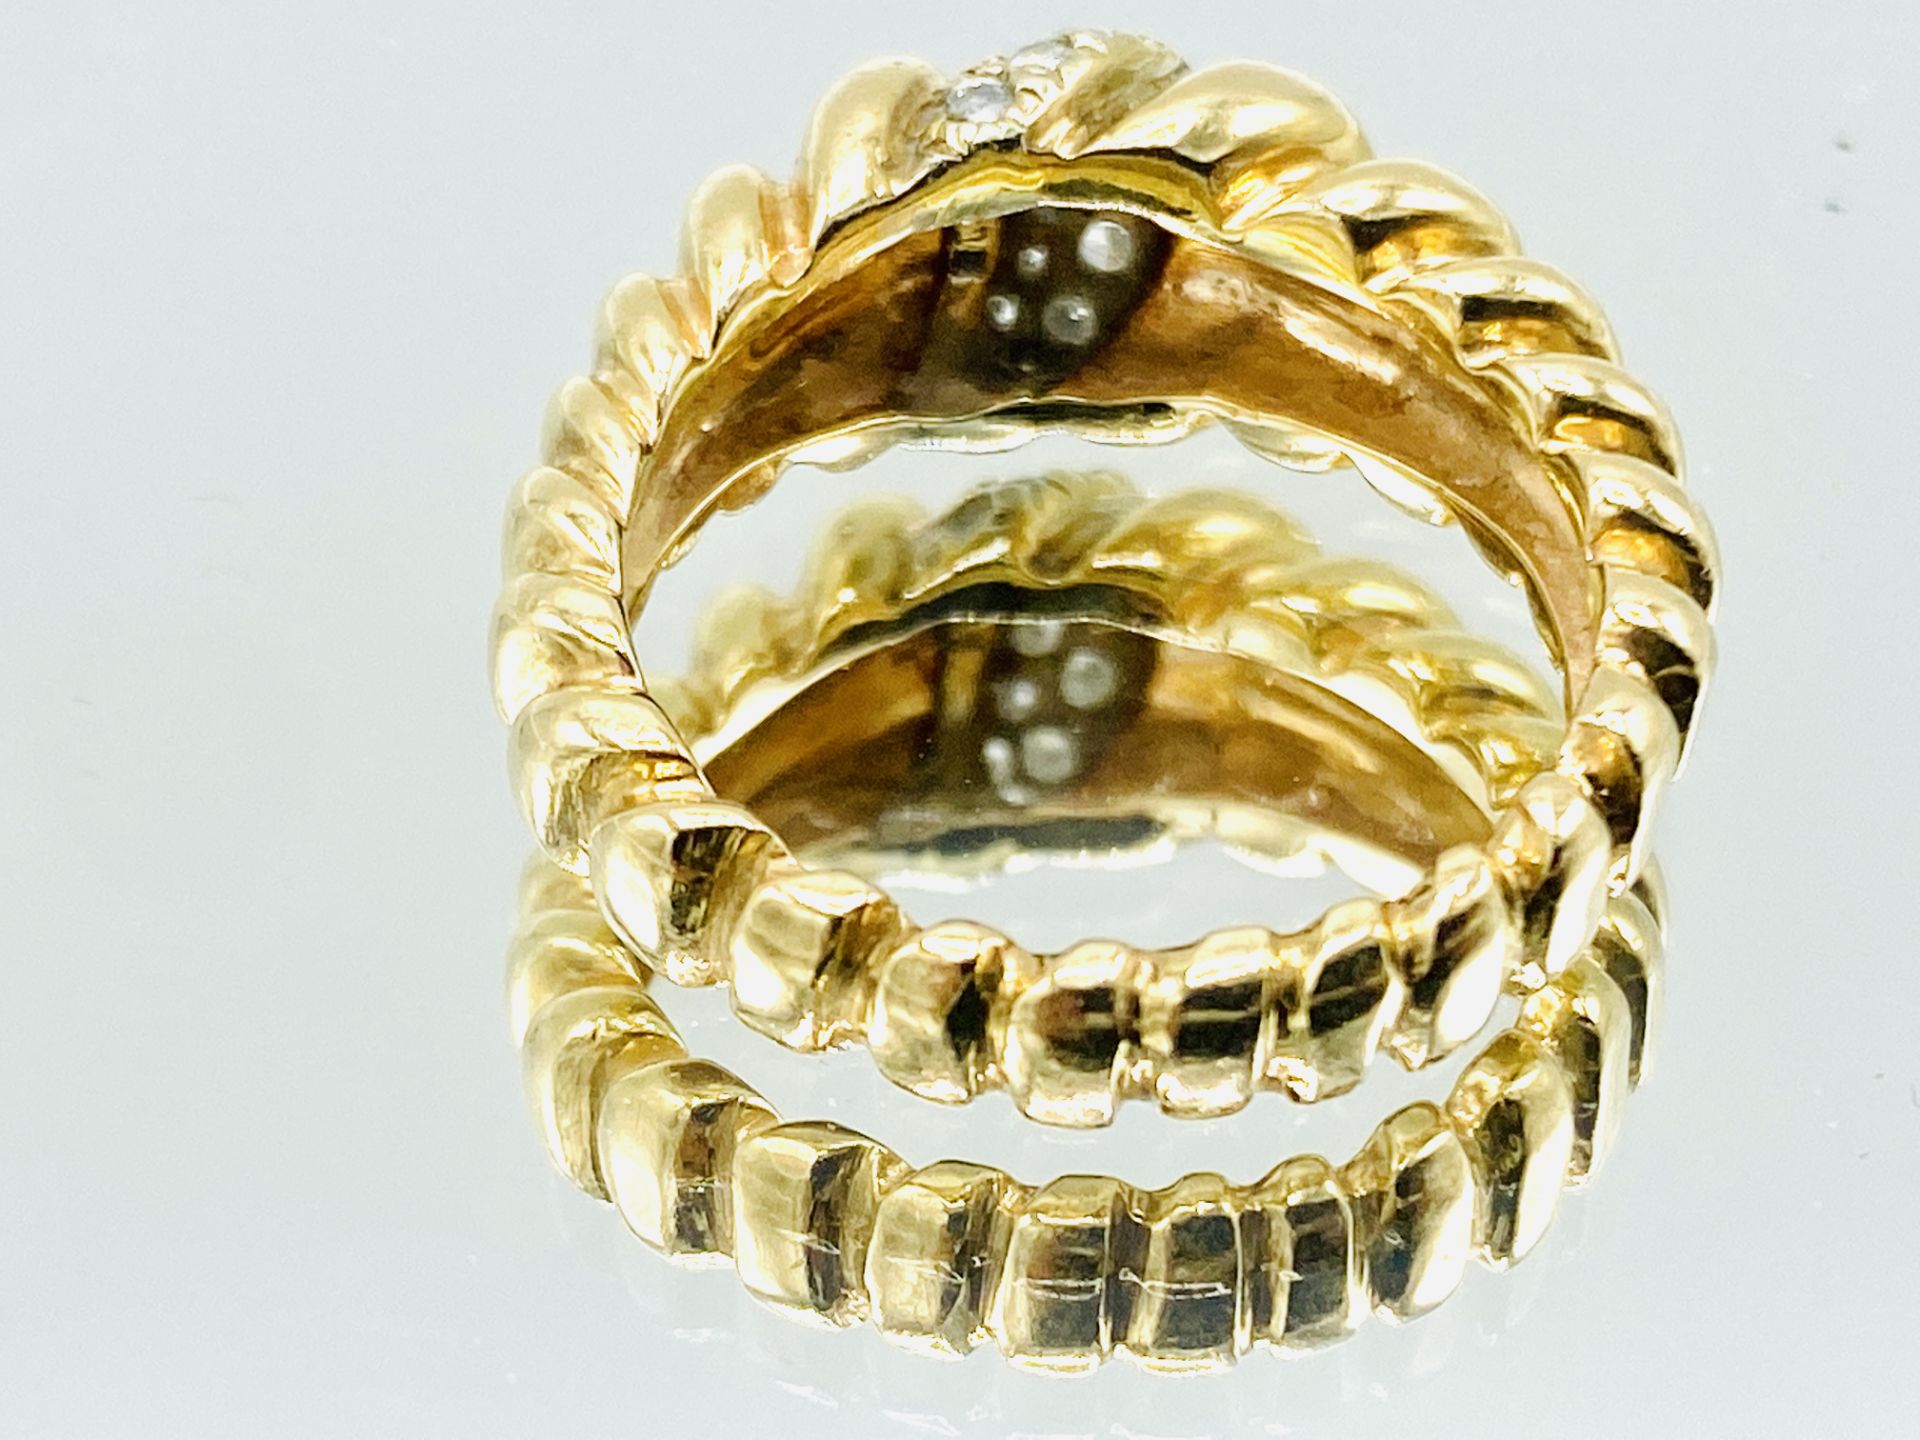 14K gold and diamond ring - Image 3 of 5